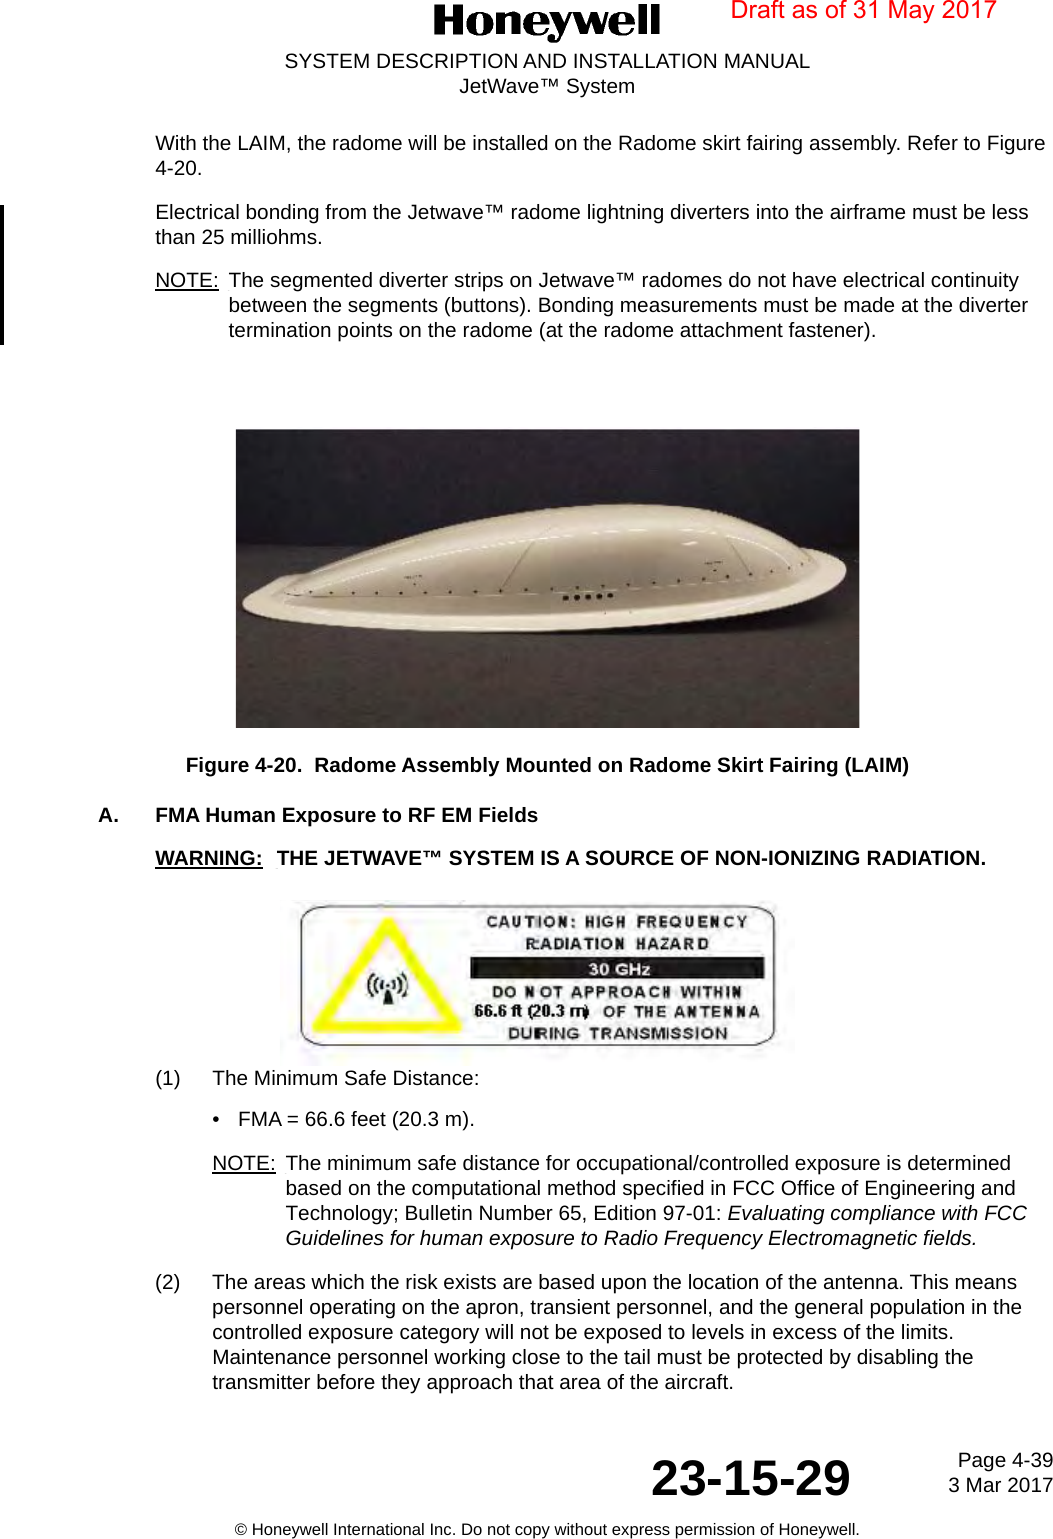 Page 4-39 3 Mar 201723-15-29SYSTEM DESCRIPTION AND INSTALLATION MANUALJetWave™ System© Honeywell International Inc. Do not copy without express permission of Honeywell.With the LAIM, the radome will be installed on the Radome skirt fairing assembly. Refer to Figure 4-20. Electrical bonding from the Jetwave™ radome lightning diverters into the airframe must be less than 25 milliohms.NOTE: The segmented diverter strips on Jetwave™ radomes do not have electrical continuity between the segments (buttons). Bonding measurements must be made at the diverter termination points on the radome (at the radome attachment fastener).Figure 4-20.  Radome Assembly Mounted on Radome Skirt Fairing (LAIM)A. FMA Human Exposure to RF EM FieldsWARNING: THE JETWAVE™ SYSTEM IS A SOURCE OF NON-IONIZING RADIATION.(1) The Minimum Safe Distance:• FMA = 66.6 feet (20.3 m).NOTE: The minimum safe distance for occupational/controlled exposure is determined based on the computational method specified in FCC Office of Engineering and Technology; Bulletin Number 65, Edition 97-01: Evaluating compliance with FCC Guidelines for human exposure to Radio Frequency Electromagnetic fields.(2) The areas which the risk exists are based upon the location of the antenna. This means personnel operating on the apron, transient personnel, and the general population in the controlled exposure category will not be exposed to levels in excess of the limits. Maintenance personnel working close to the tail must be protected by disabling the transmitter before they approach that area of the aircraft.Draft as of 31 May 2017